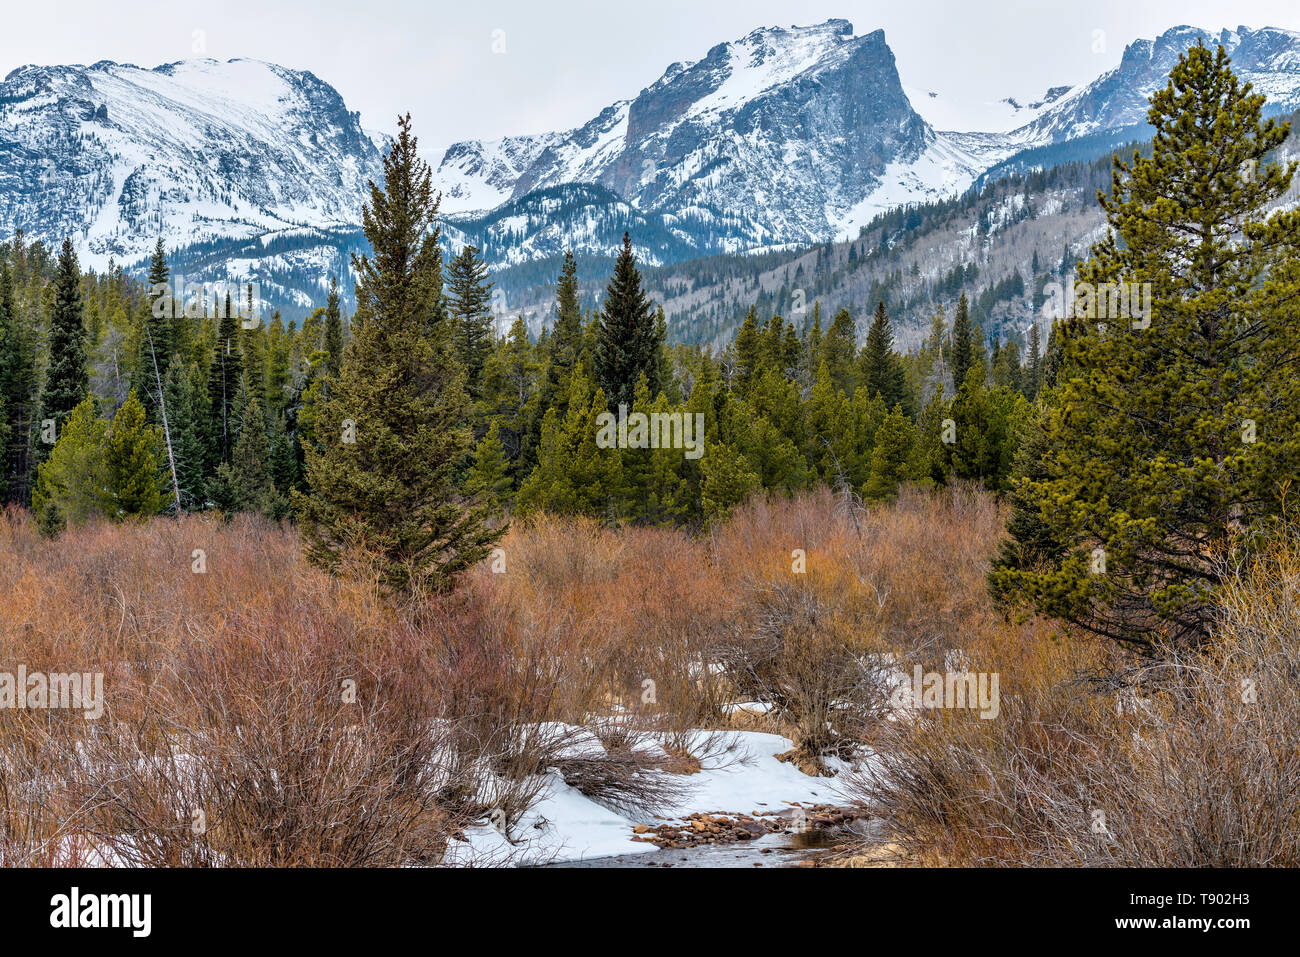 Spring Mountains - Snow-capped peaks: Hallett Peak, Otis Peak and Flattop Mountain, surrounded by pine forest in Rocky Mountain National Park, Co, USA. Stock Photo